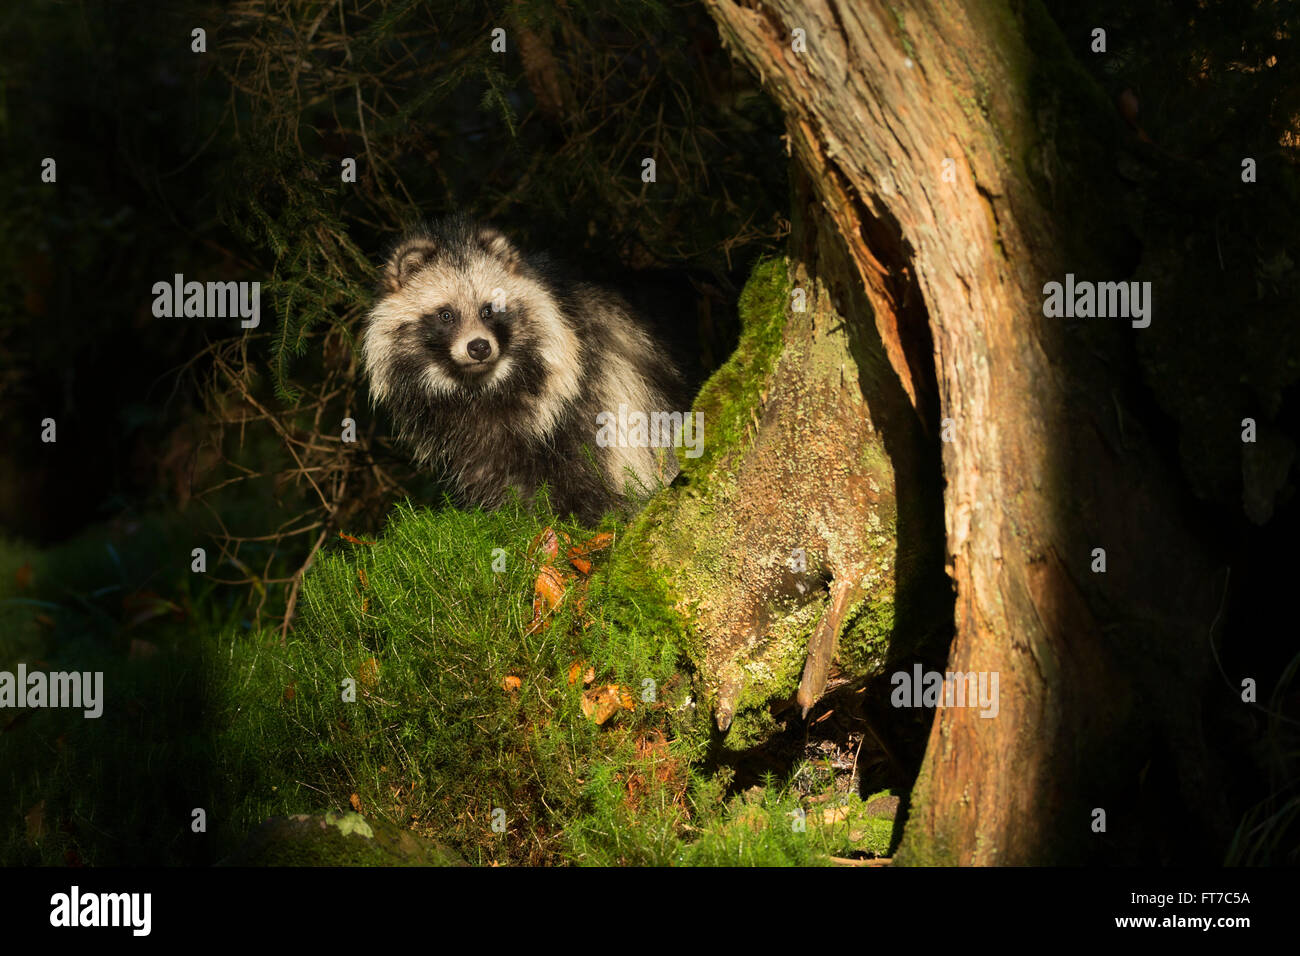 Raccoon dog / Marderhund ( Nyctereutes procyonoides ) in natural spotlight, living secretly in a dark forest. Stock Photo